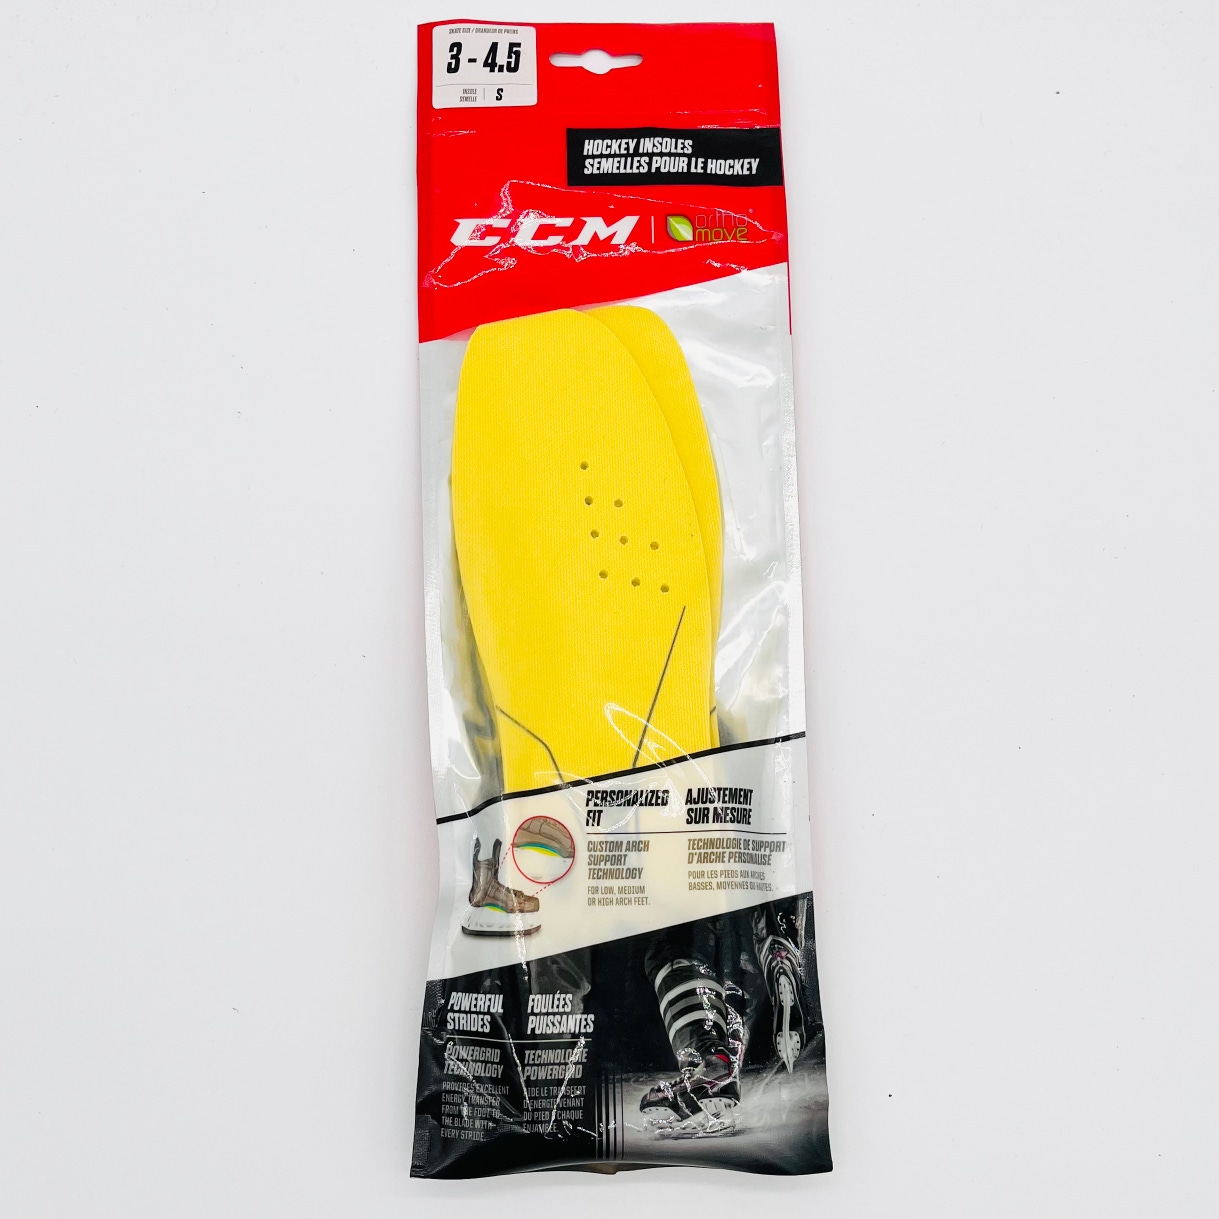 New CCM Orthomove Insoles-3-4.5